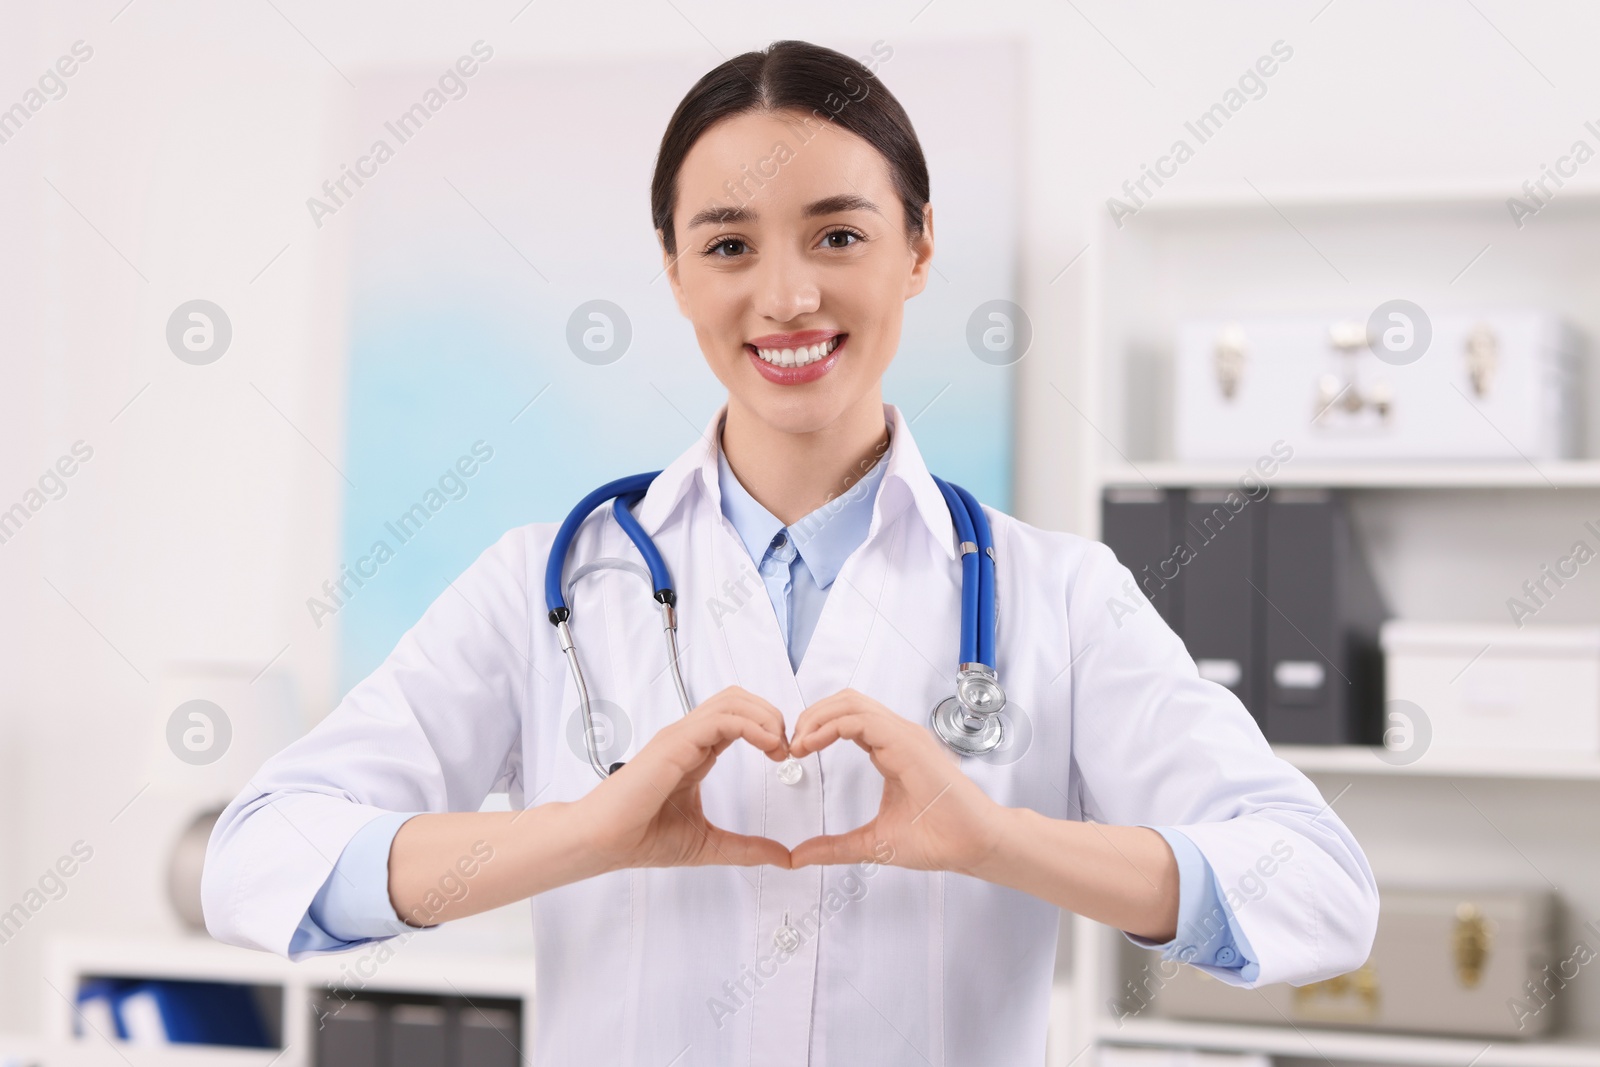 Photo of Doctor showing heart gesture with hands in clinic